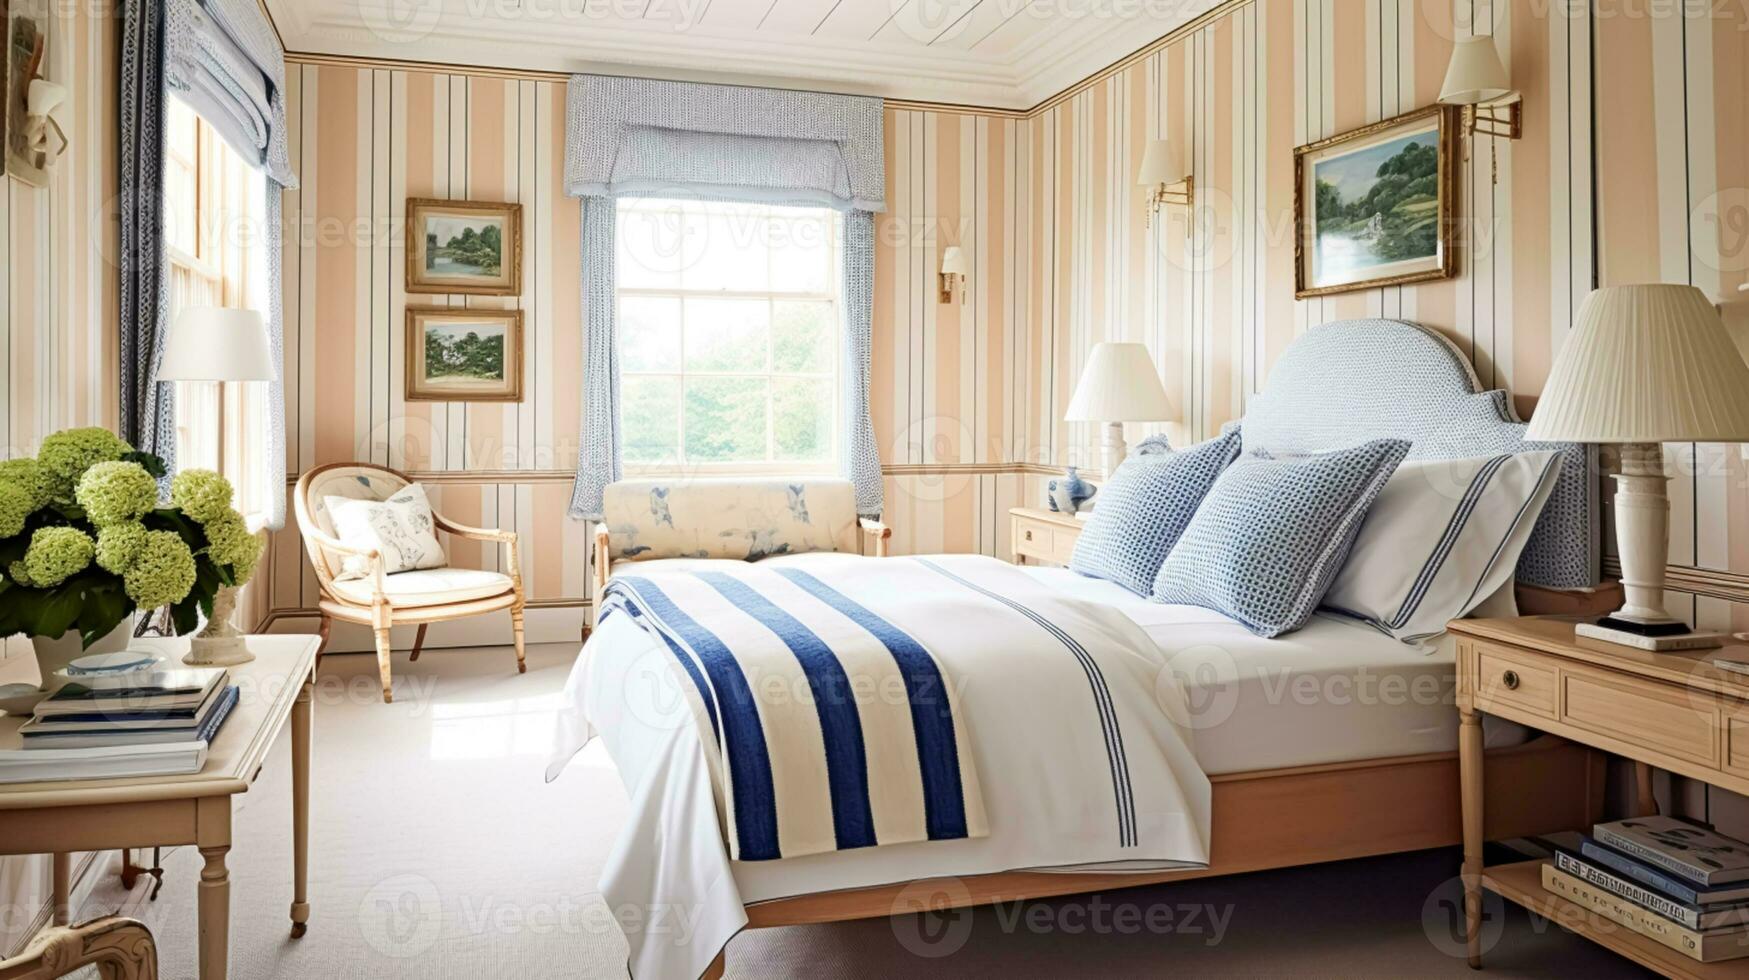 Interior design, bedroom decor and home improvement, country cottage style furniture, bed, bedding and textiles with blue accents, generative ai photo